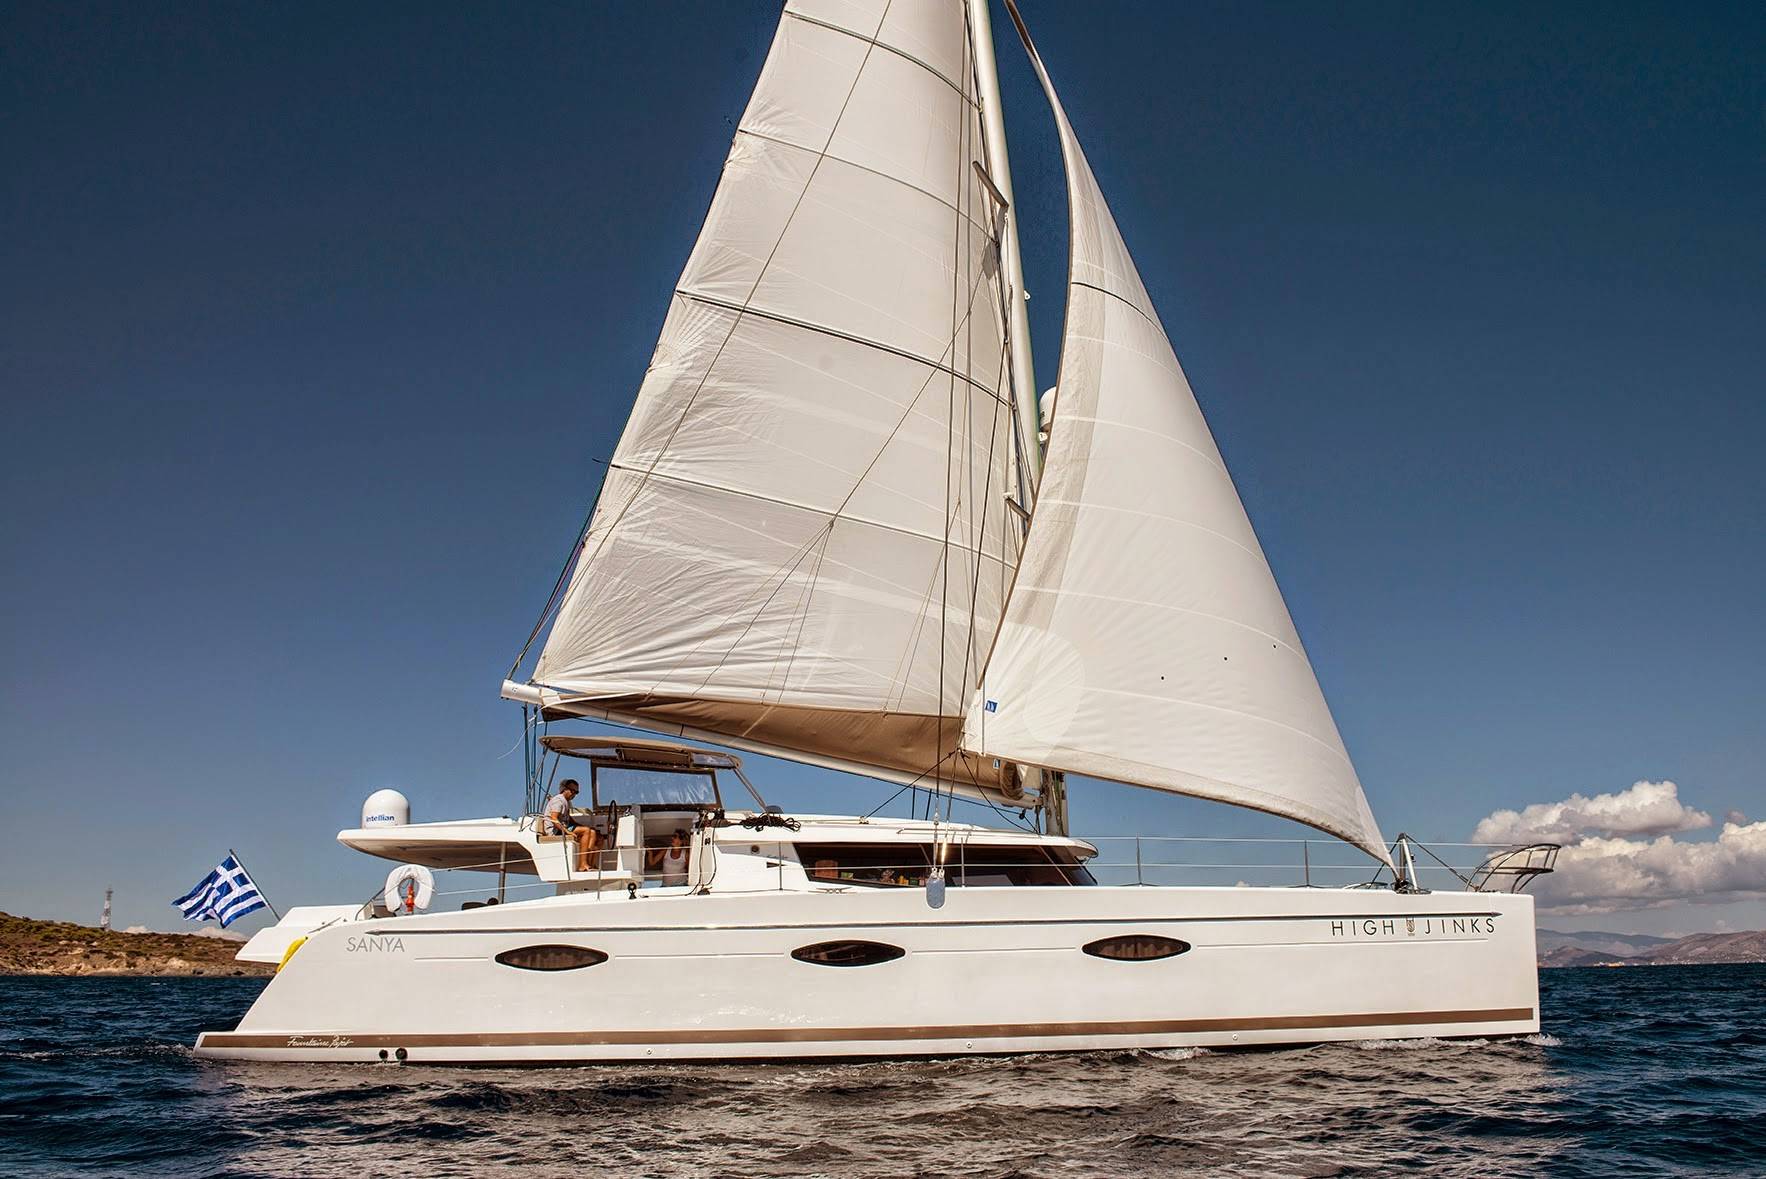 High Jinks Private Luxury Yacht Charter